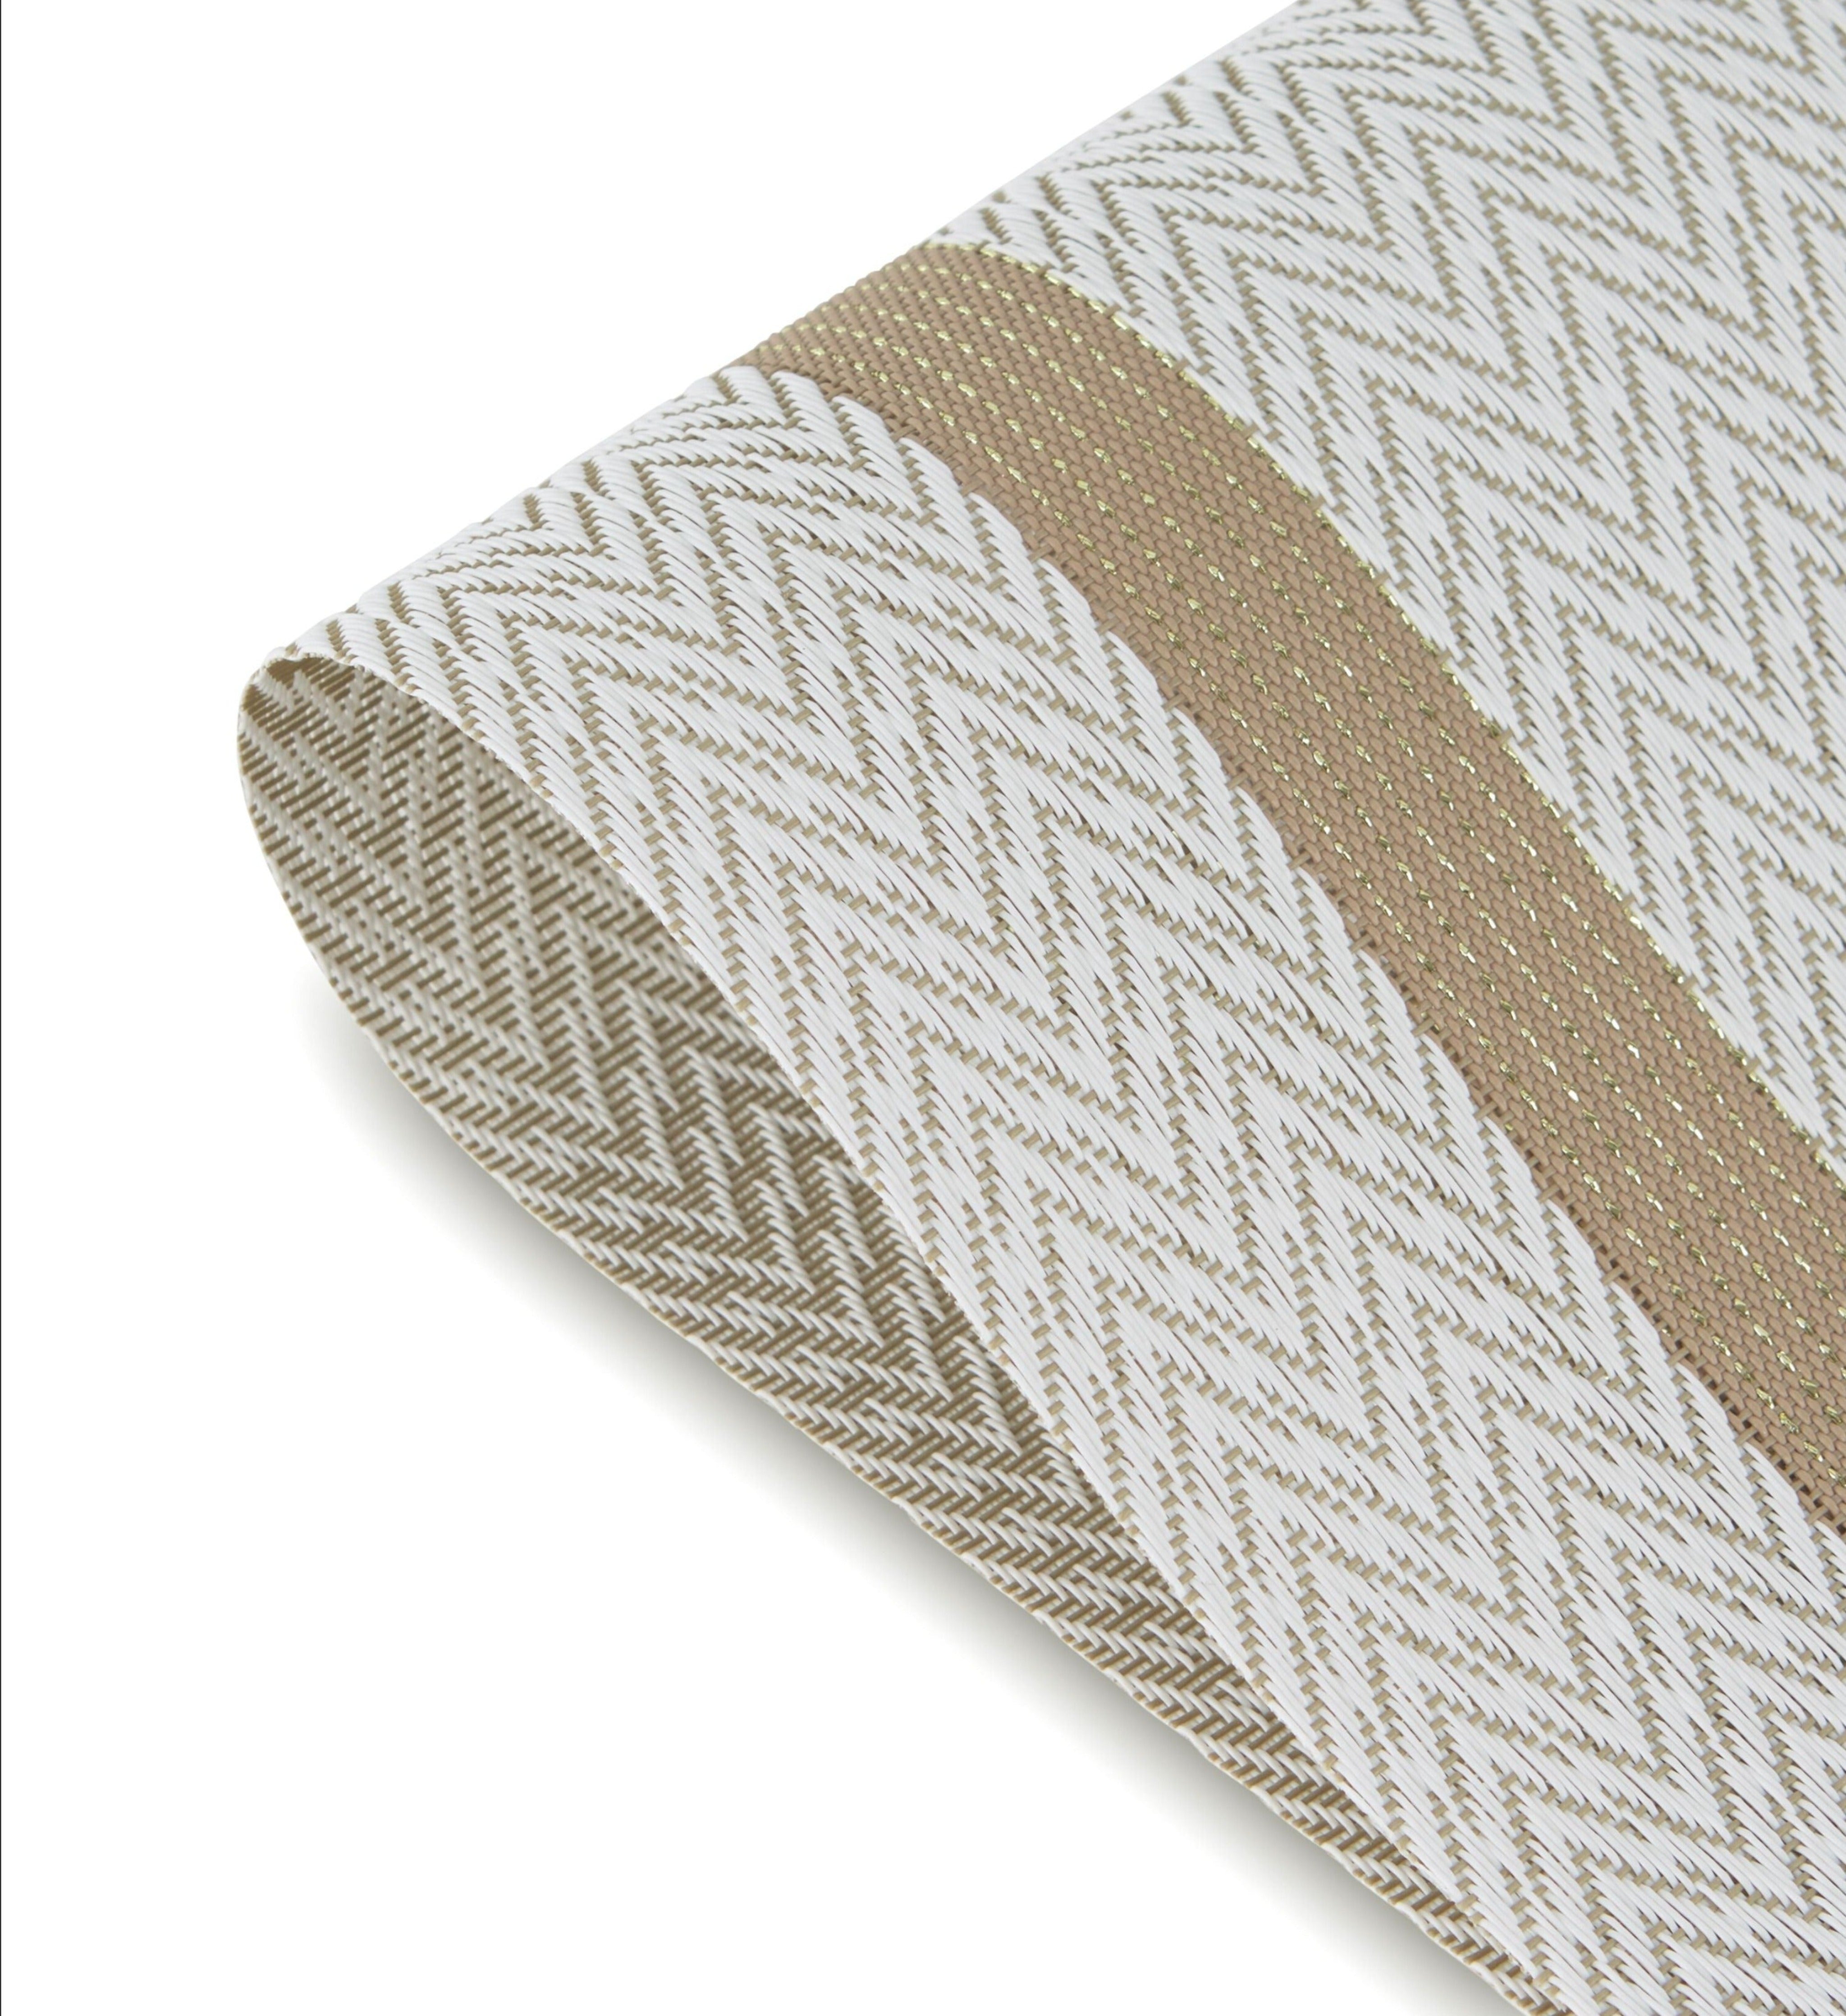 Dainty Home Annandale Woven Texteline Textured Design Reversible 12" x 18" Rectangular Placemats Set of 6